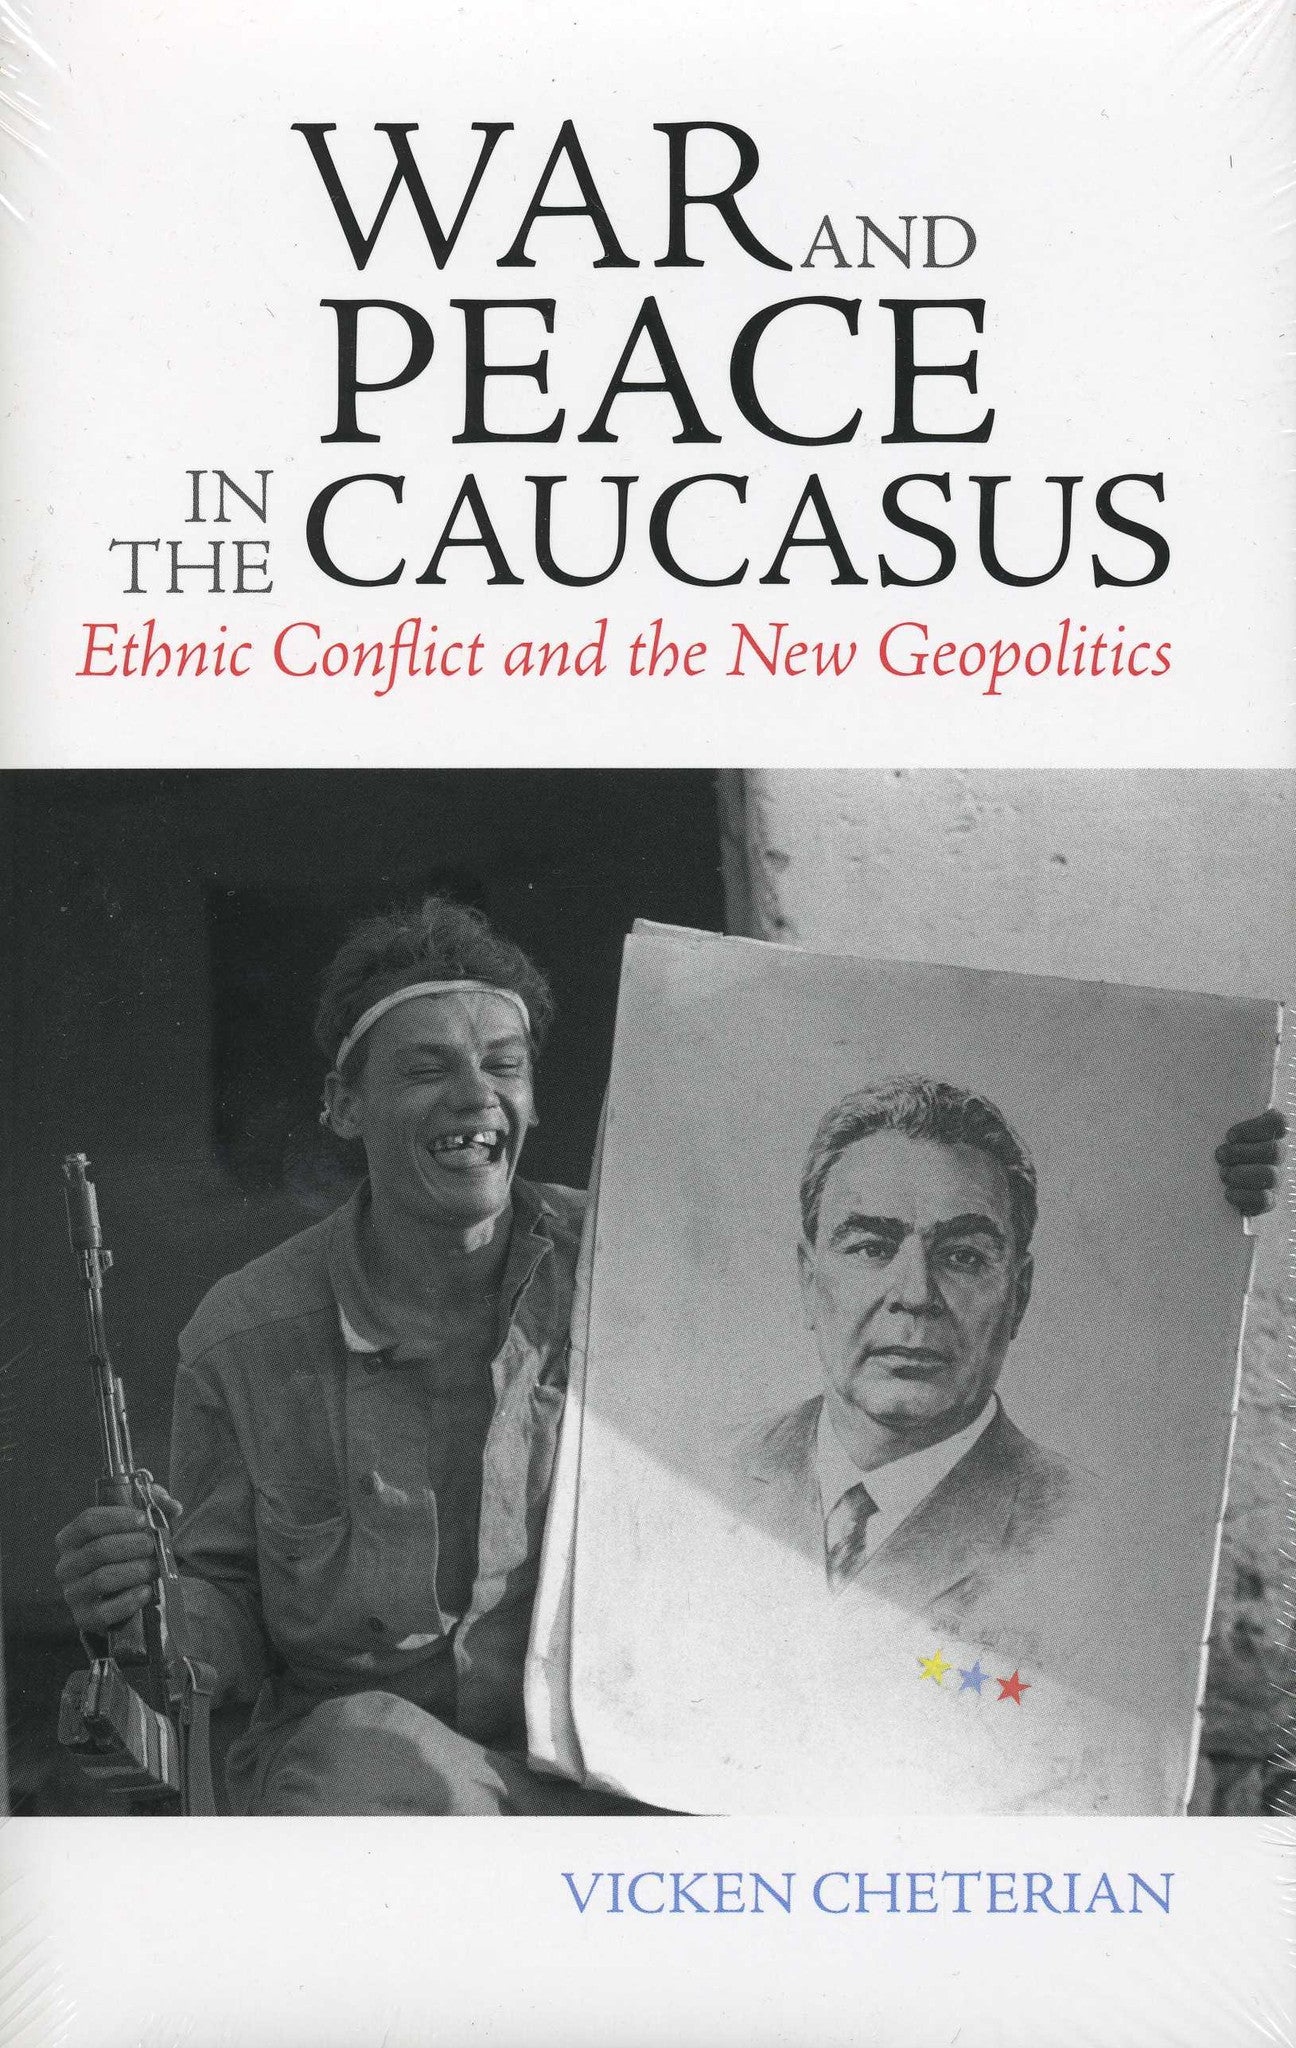 WAR AND PEACE IN THE  CAUCASUS: Ethnic Conflict and the New Geopolitics